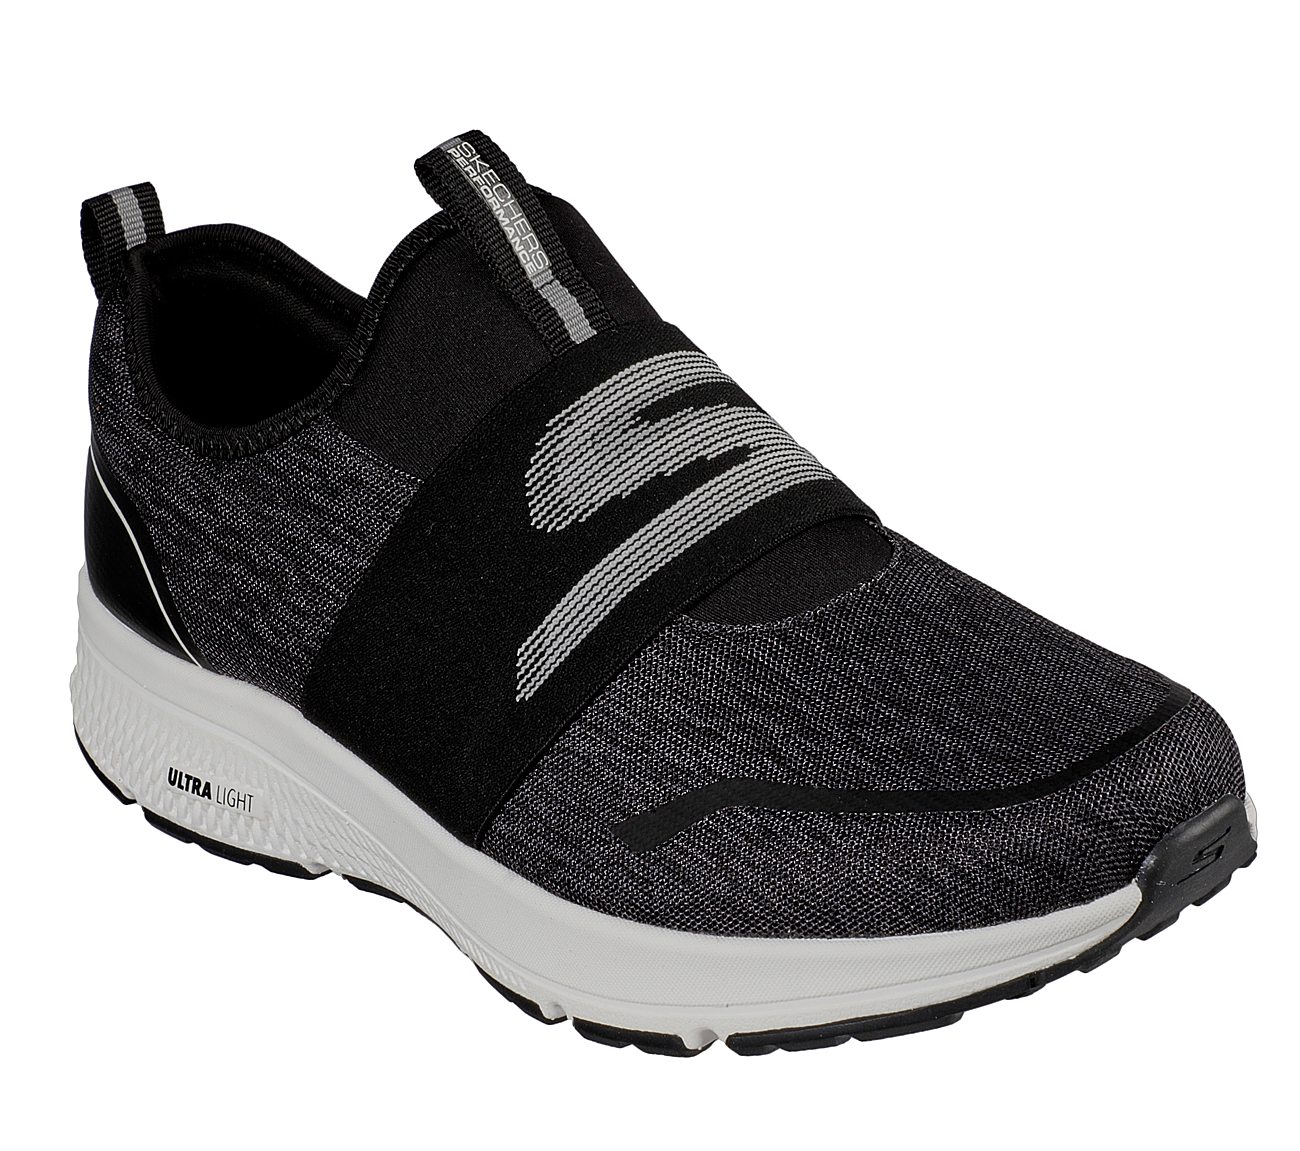 GO RUN CONSISTENT - AMBITION, BLACK/WHITE Footwear Lateral View